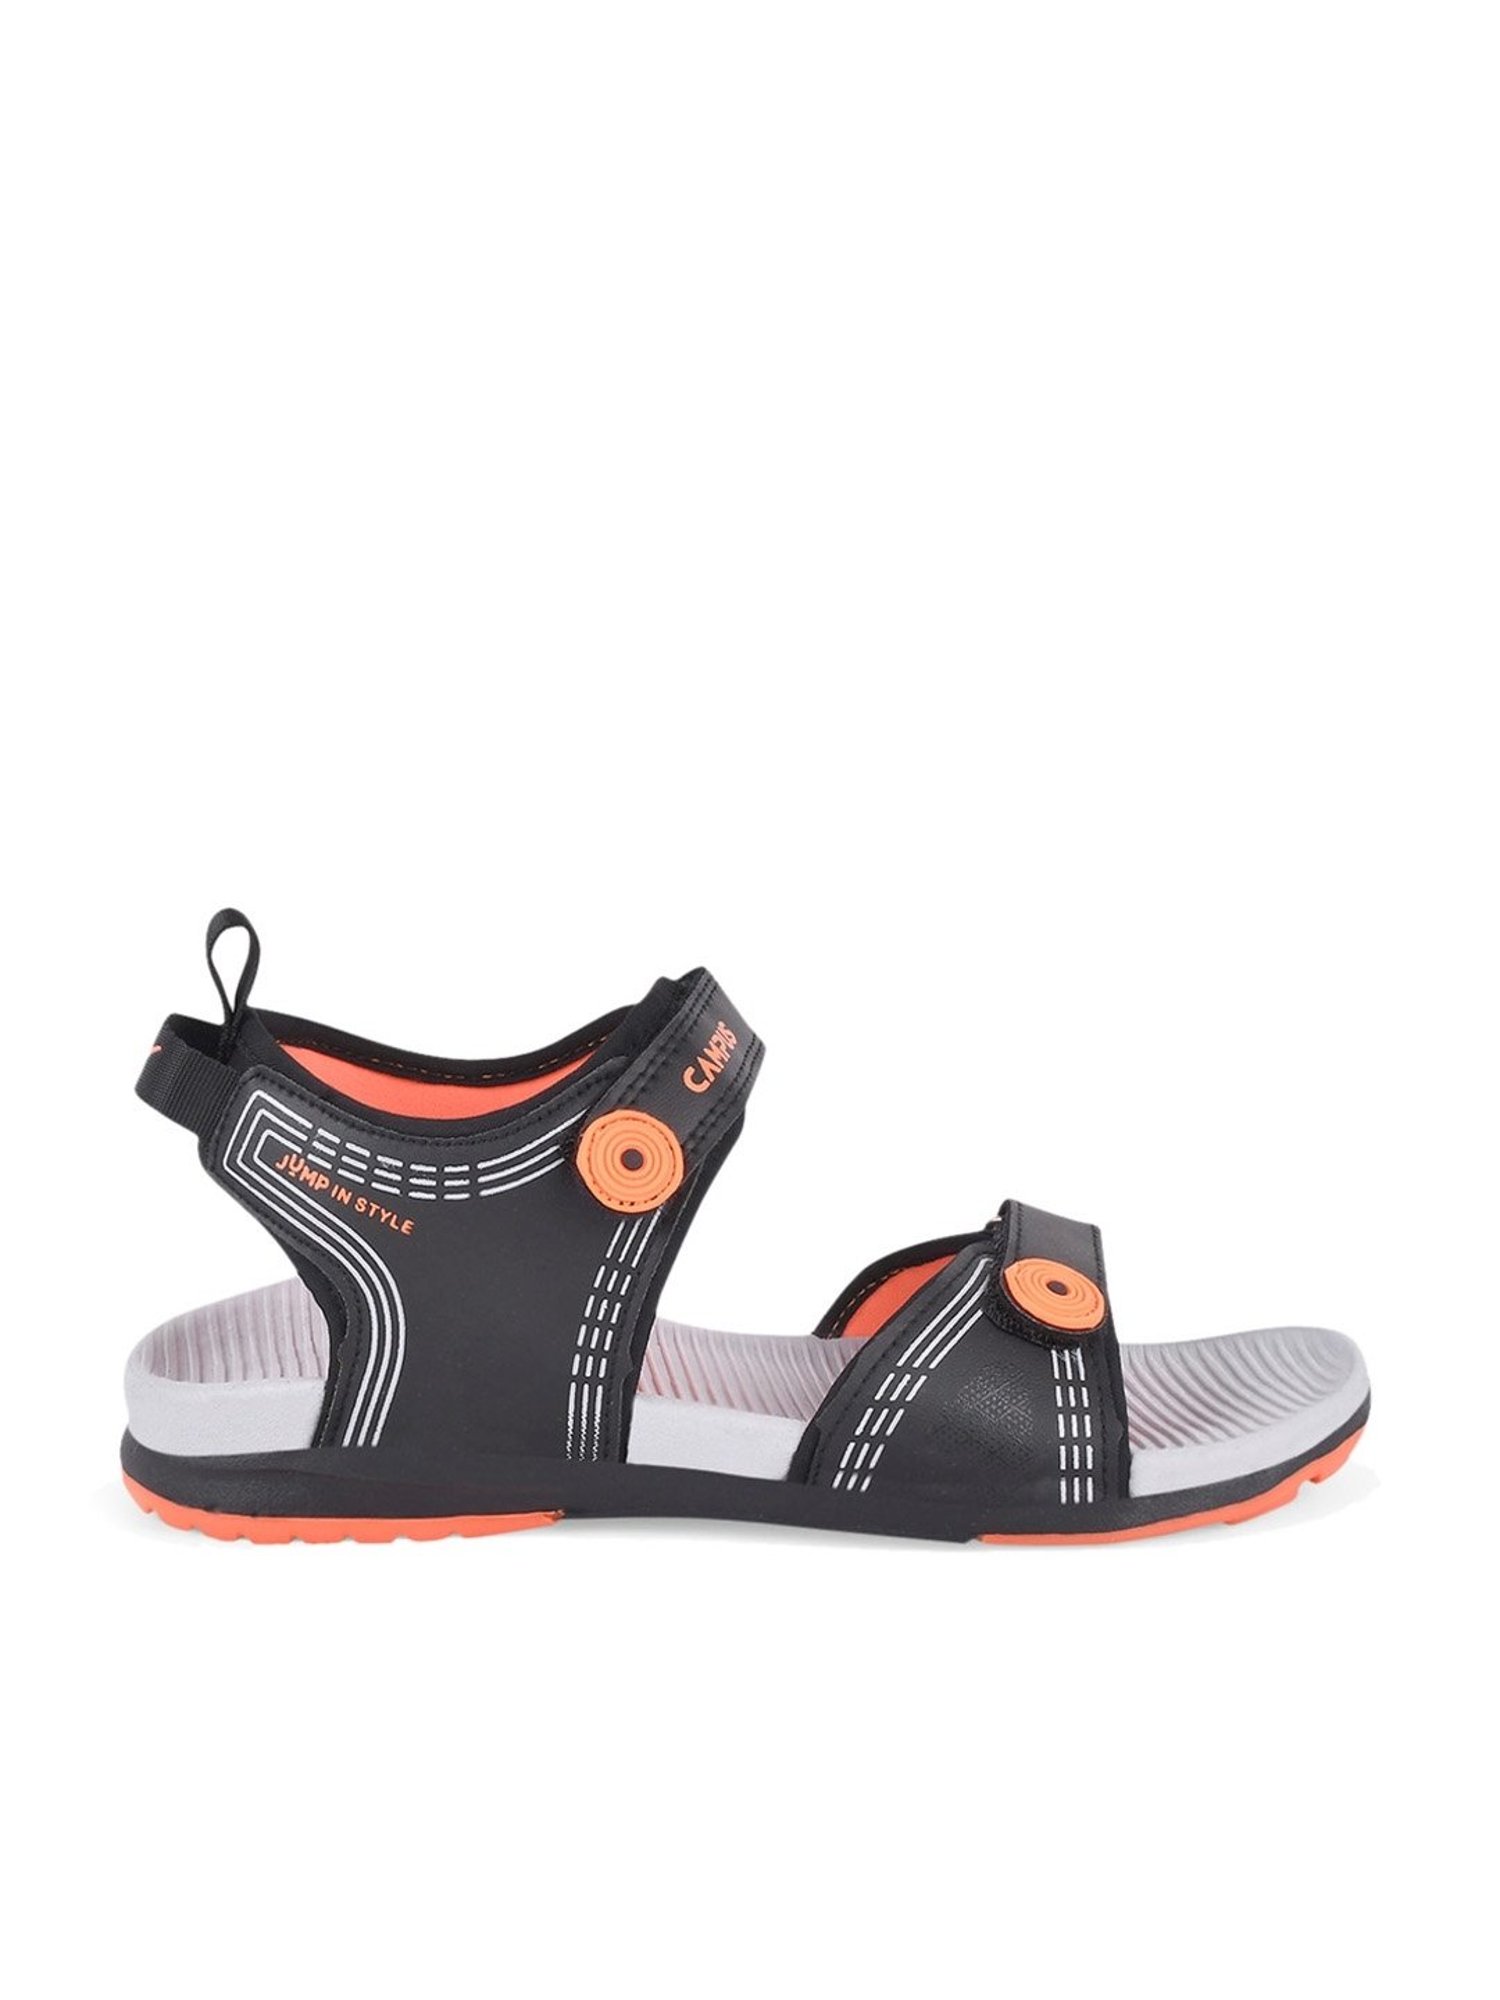 Campus Men's Sd-054 BLK-DGRY-RED Outdoor Sandals -6 UK/India : Amazon.in:  Fashion